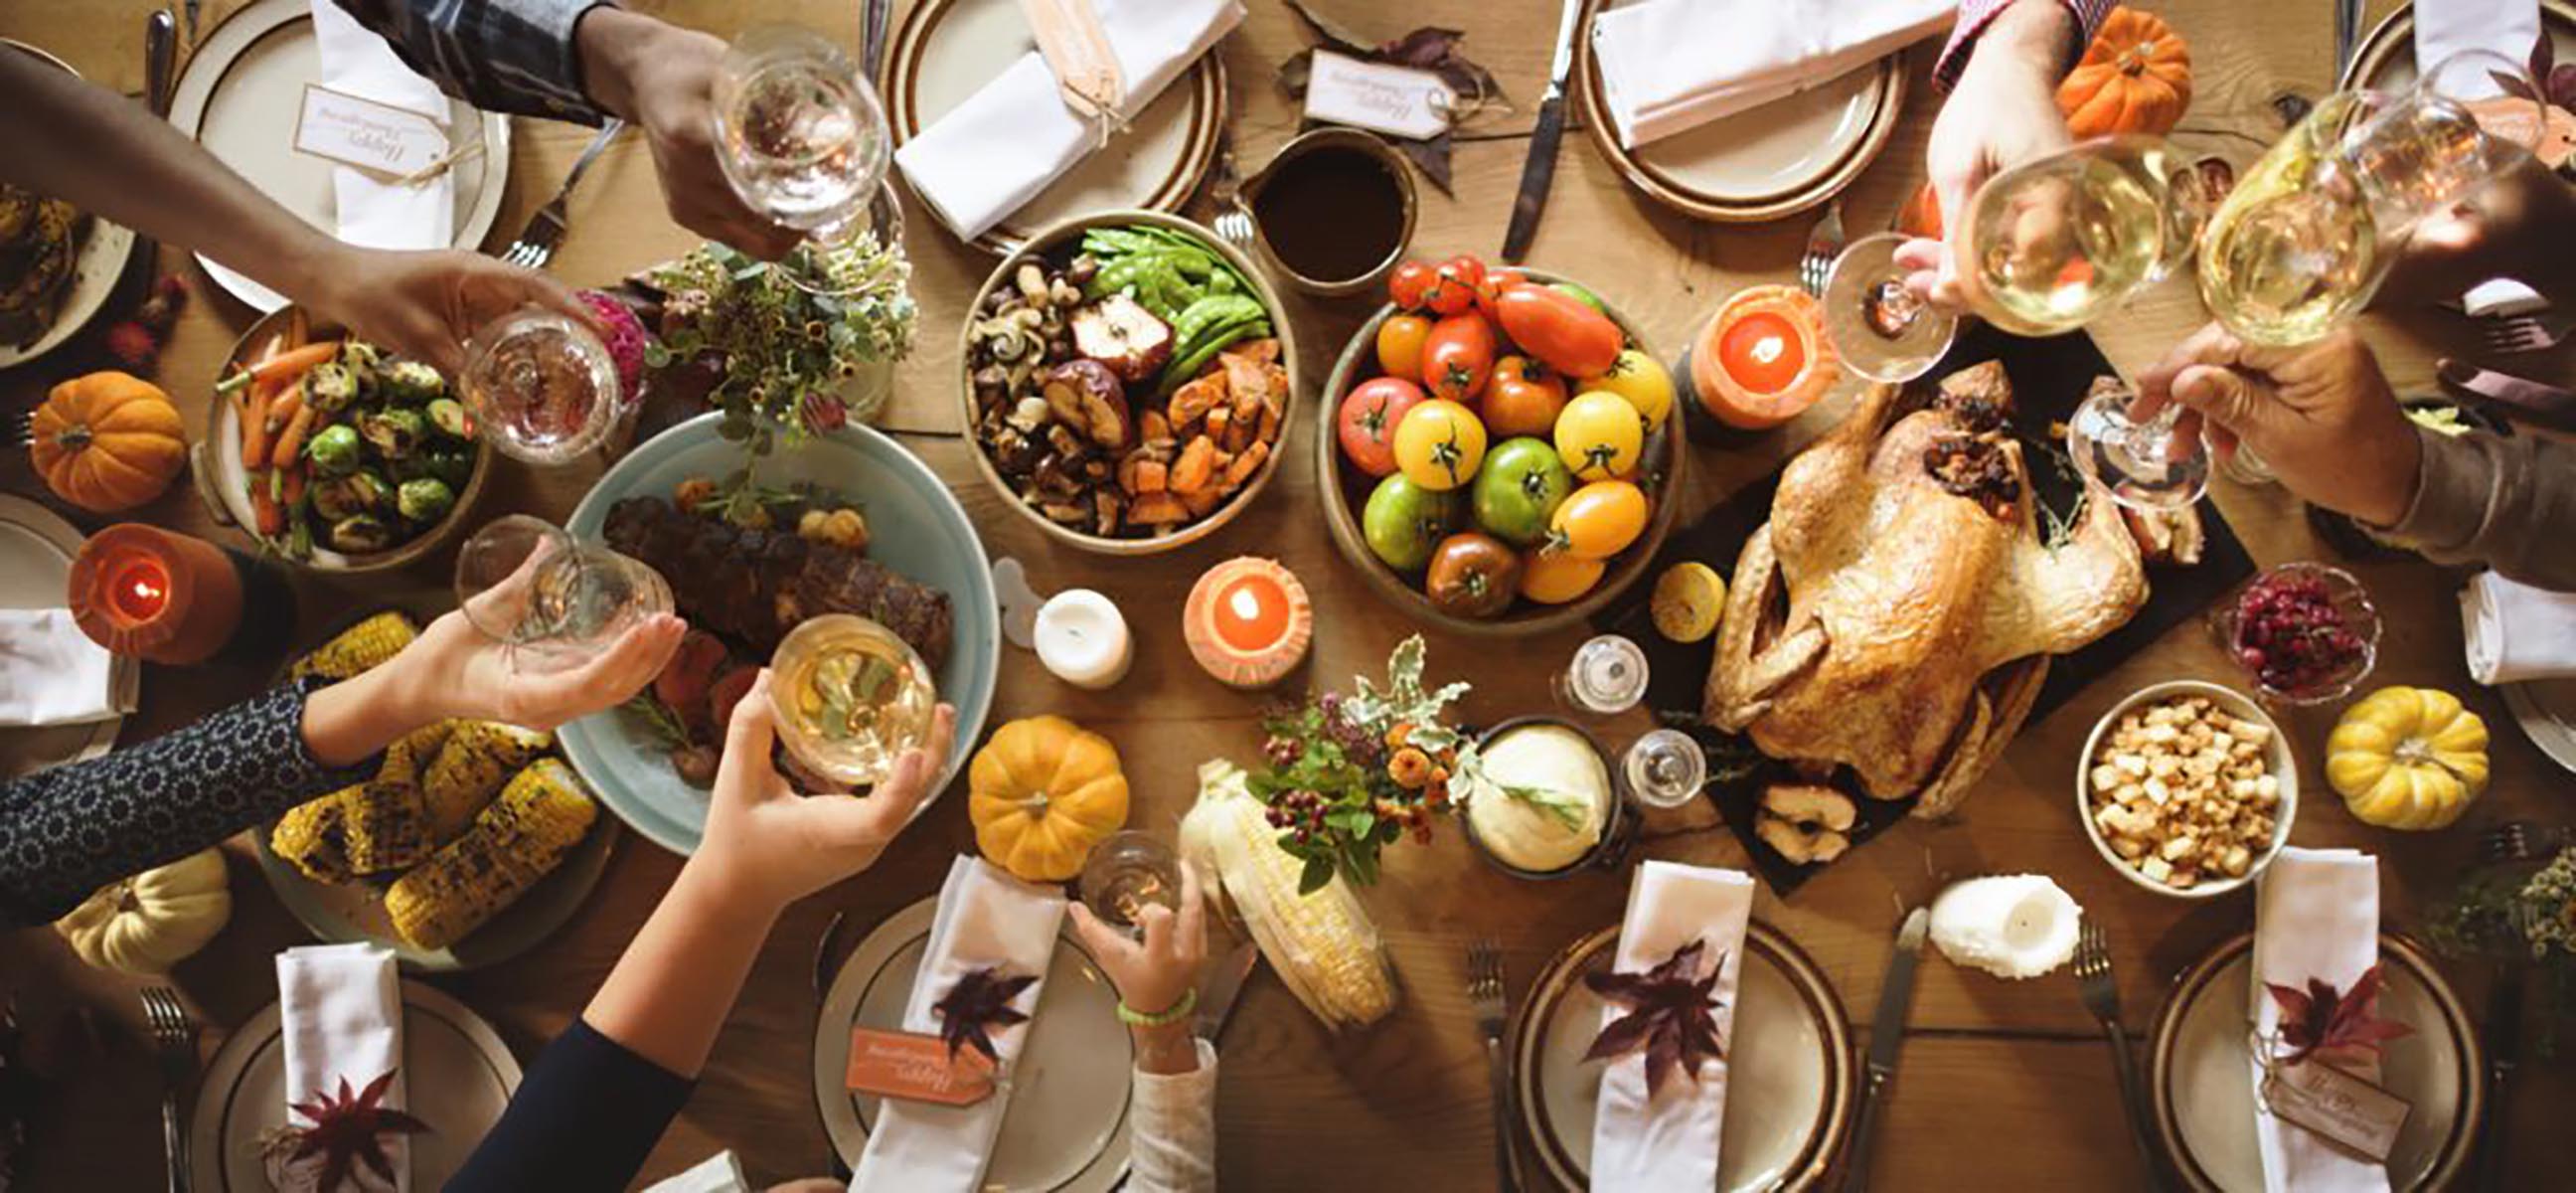 learn how to have thanksgiving without breaking the bank